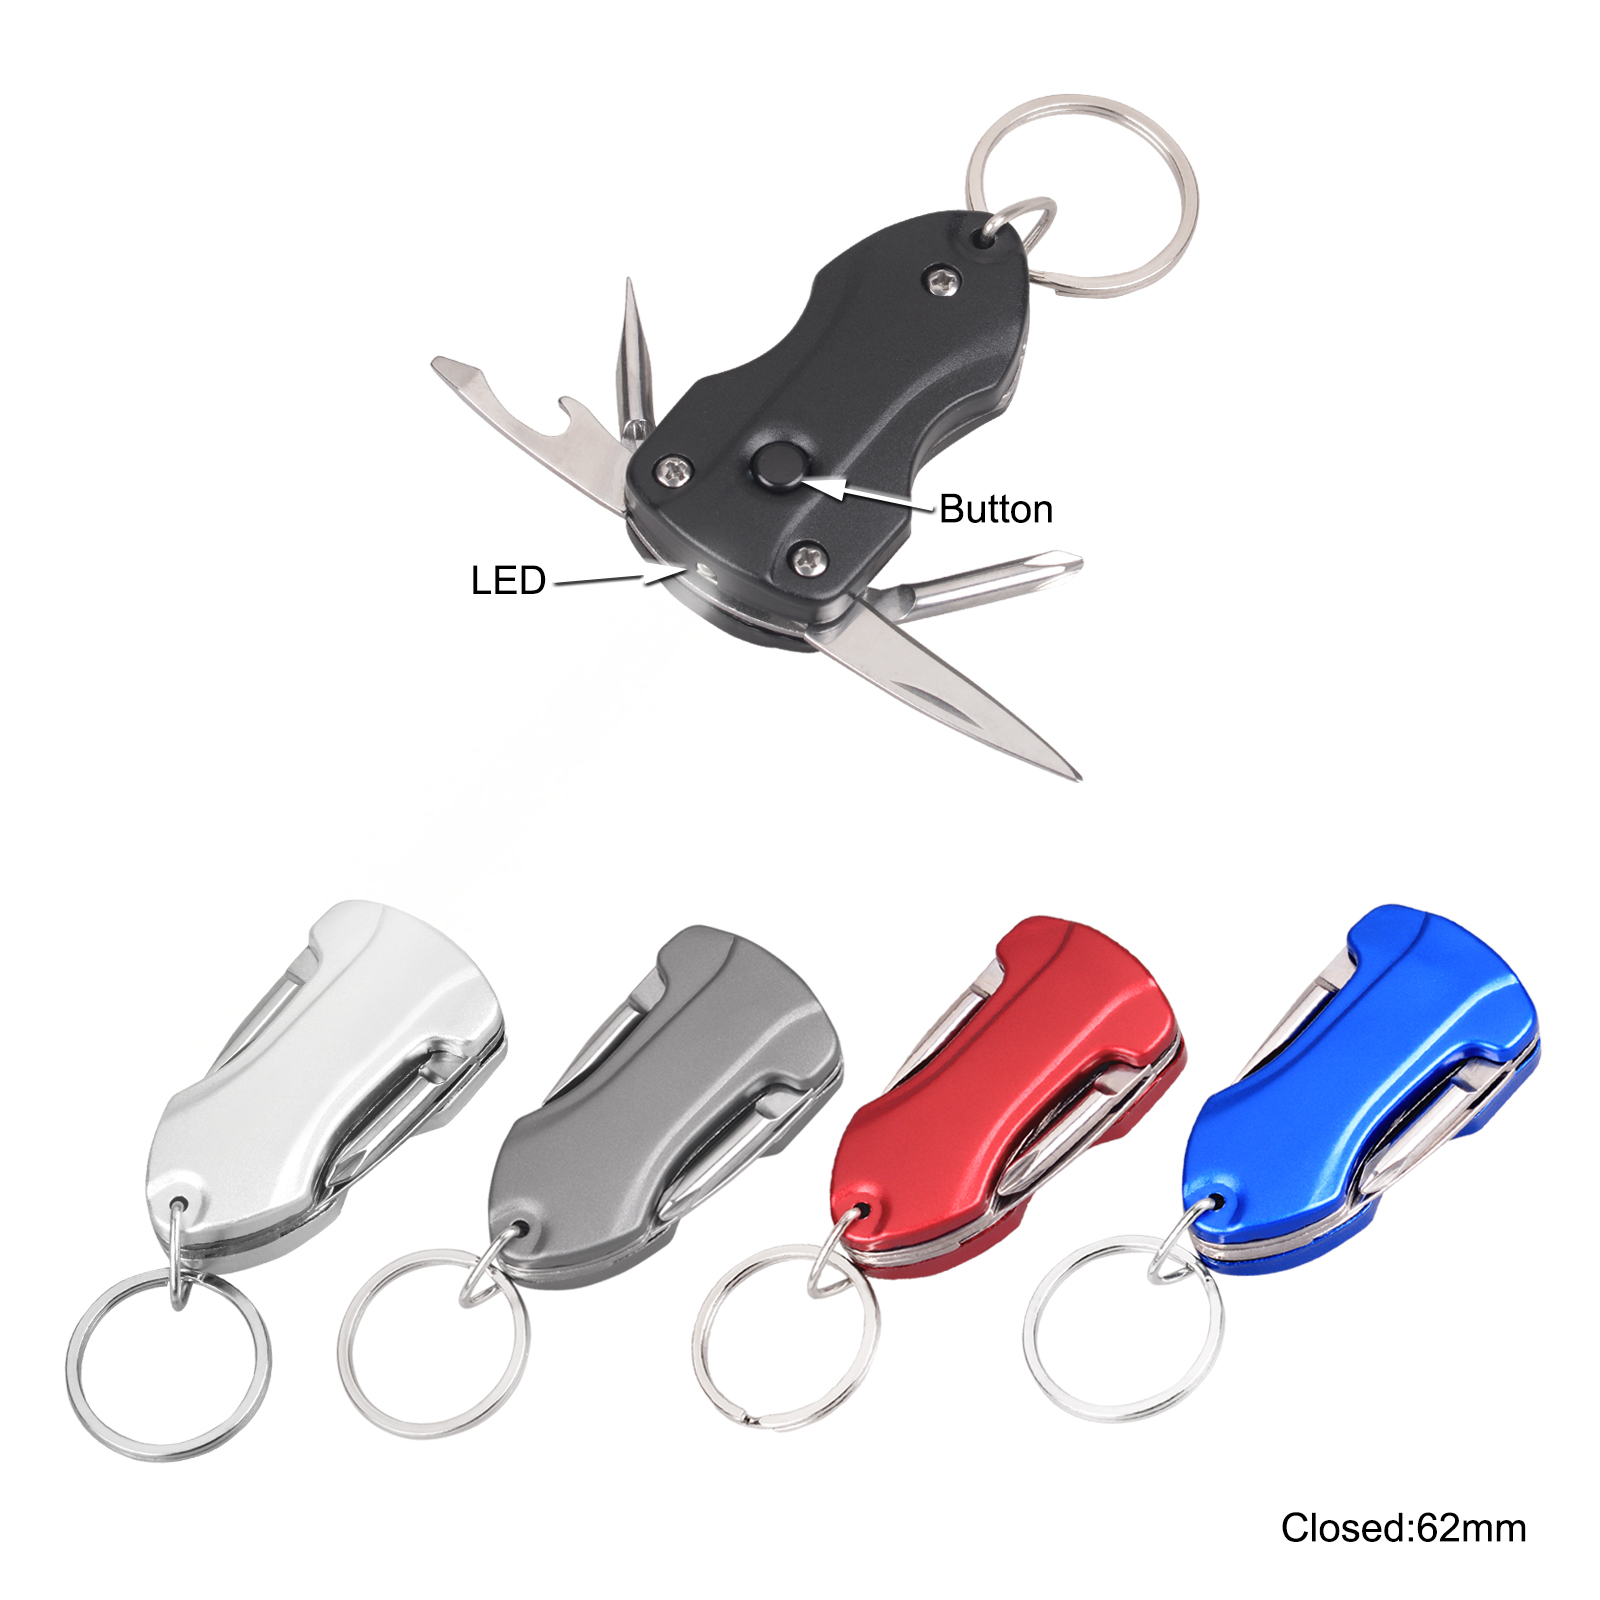 #6300 Multi Function Key Chain Tools with LED Torch 